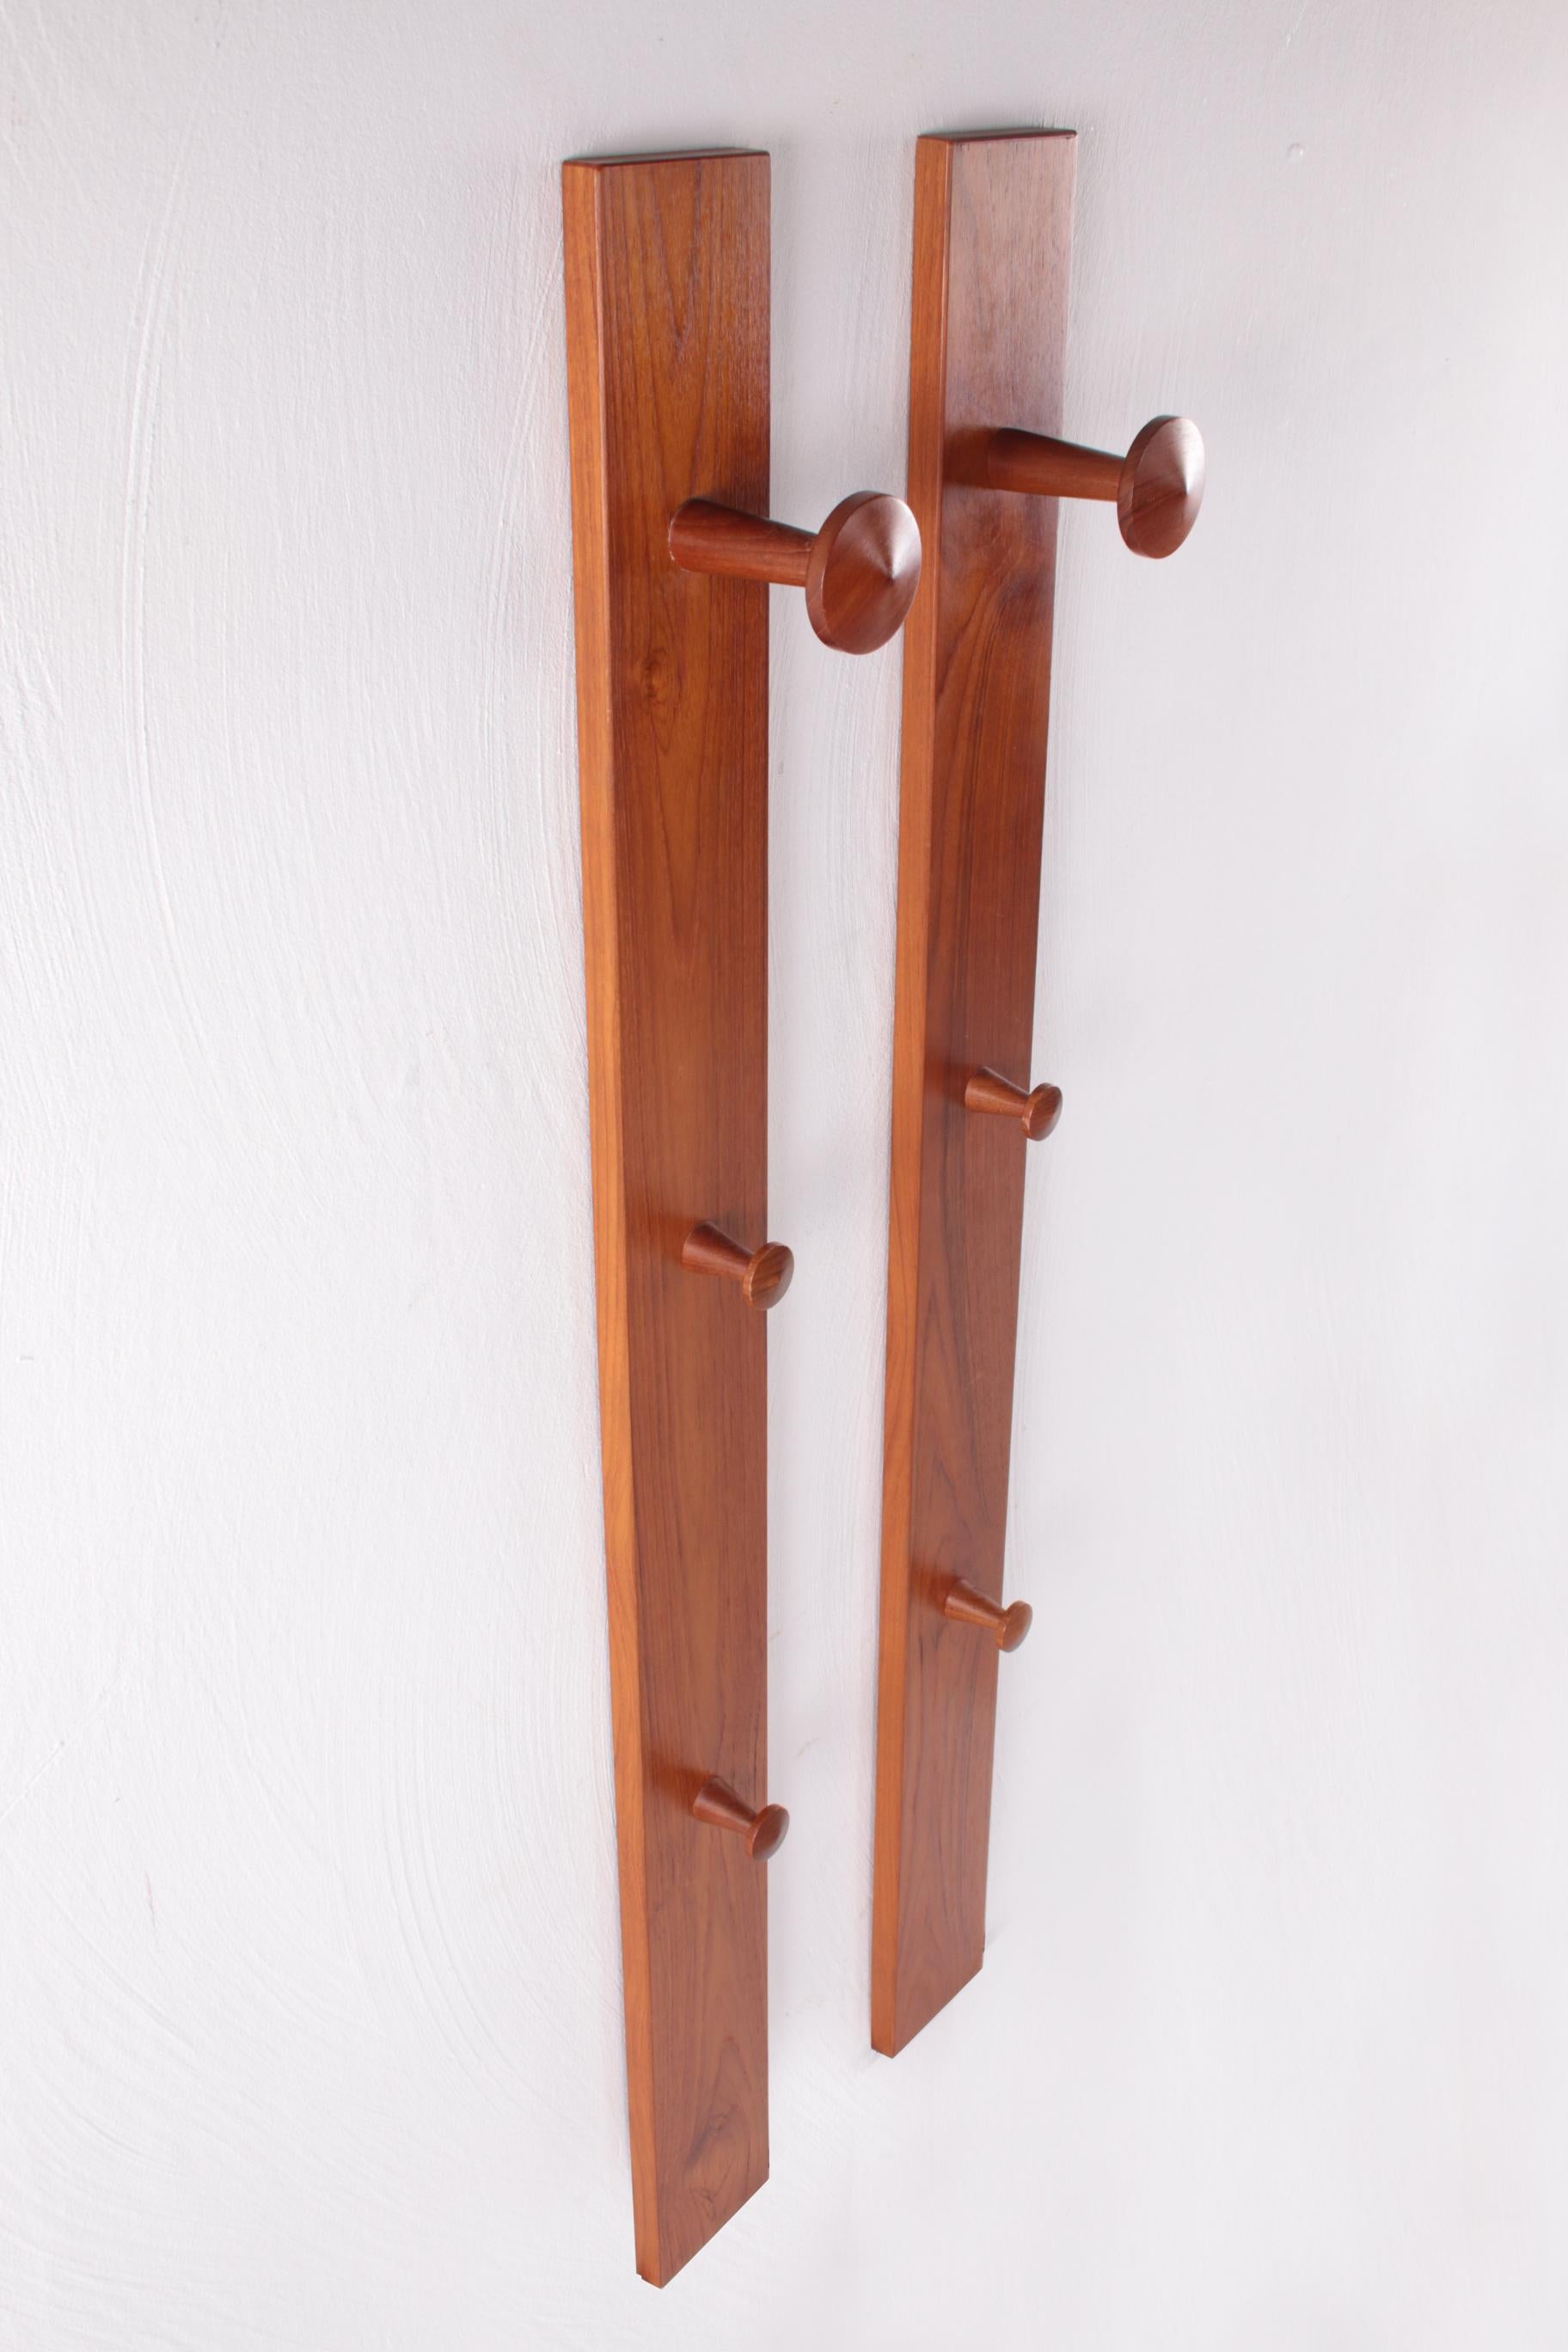 Minimalist teak wall hooks by Aksel Kjersgaard for Odder Møbler, set of 2


Very nice set of wardrobe hooks from Aksel Kjersgaard from Denmark. Very high quality and elegant design. The wardrobes are excellently manufactured and in beautiful